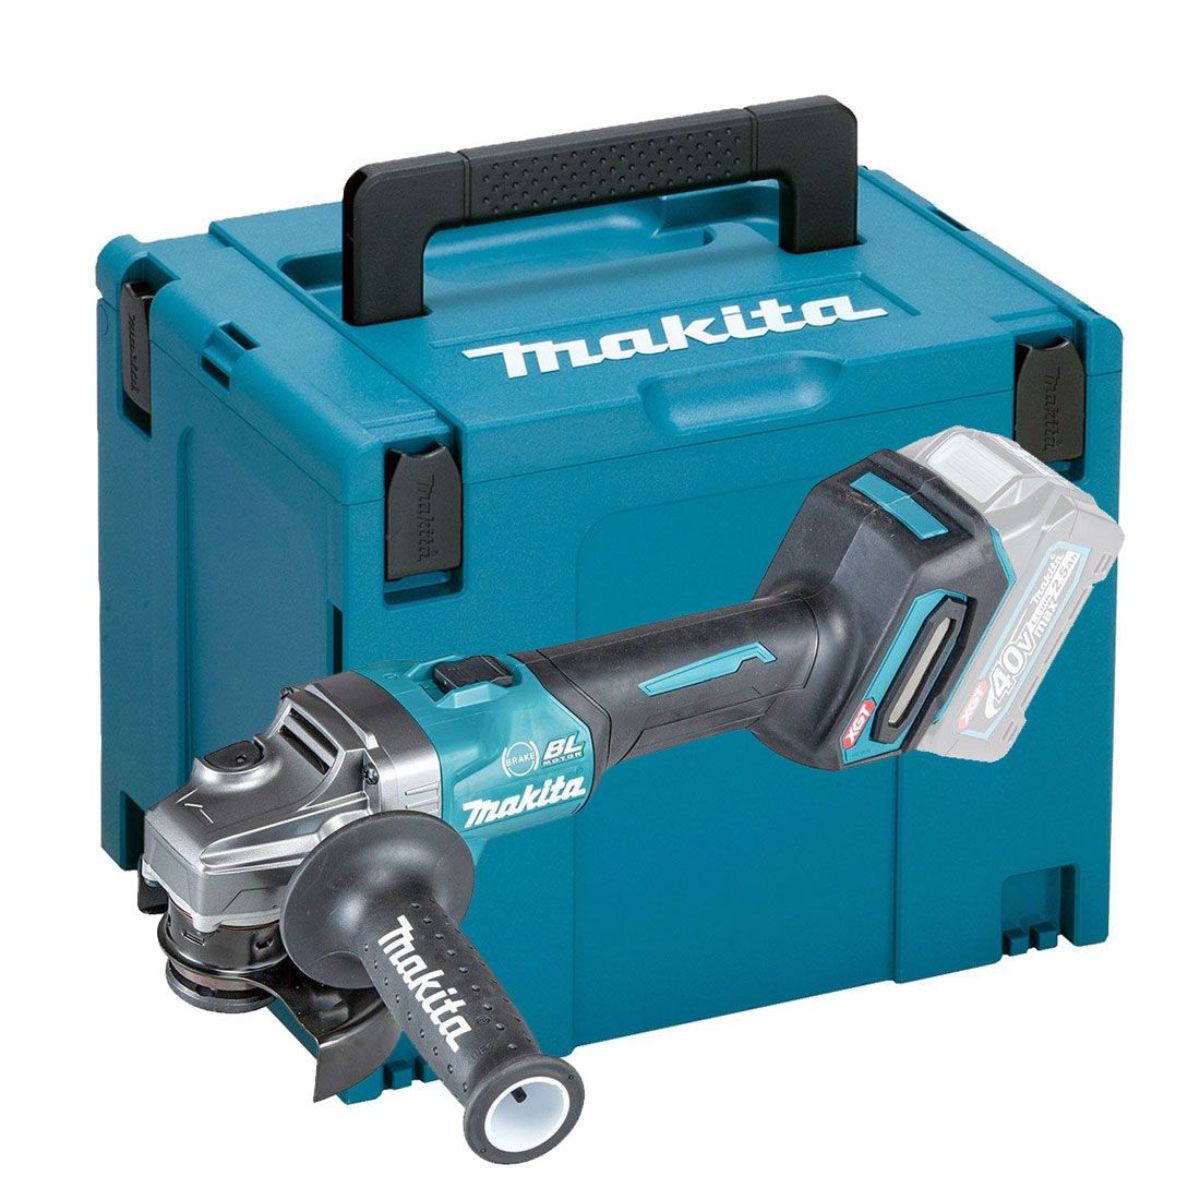 Makita GA004GZ01 40v Max XGT 115mm Brushless Angle Grinder Body Only With Carry Case